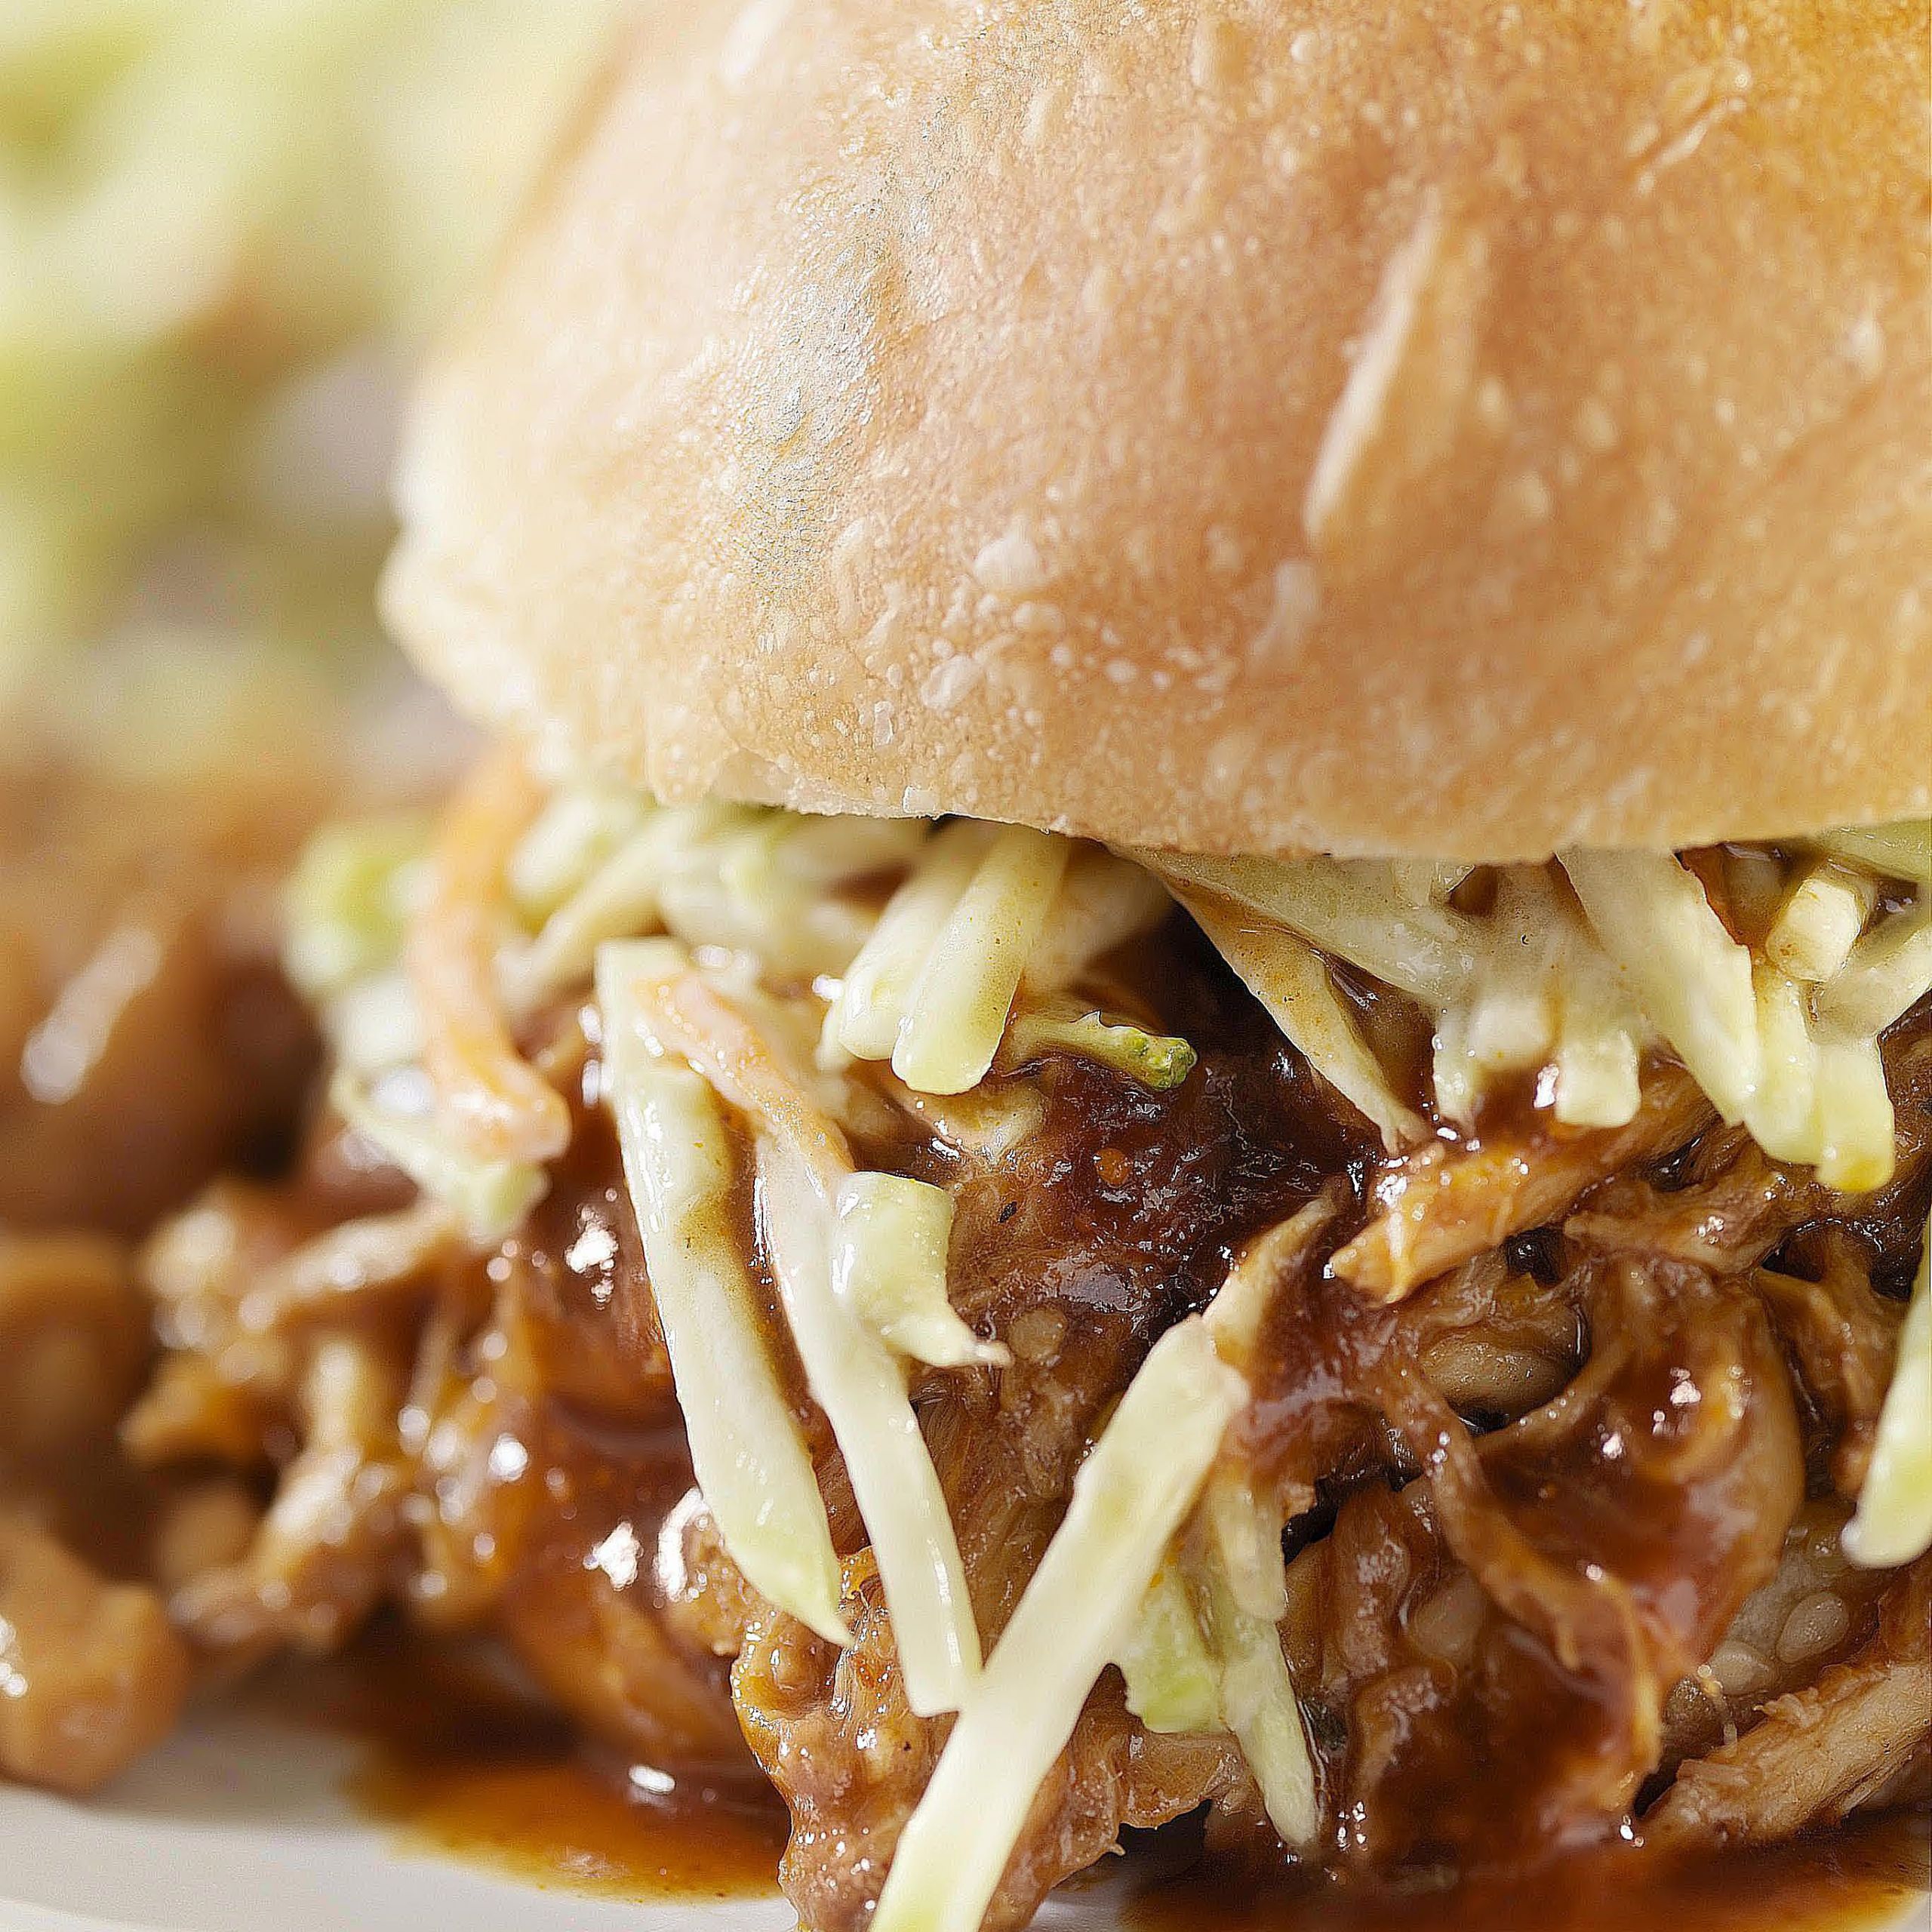 Don’t Miss Our 15 Most Shared Best Bbq Sauce Recipe for Pulled Pork